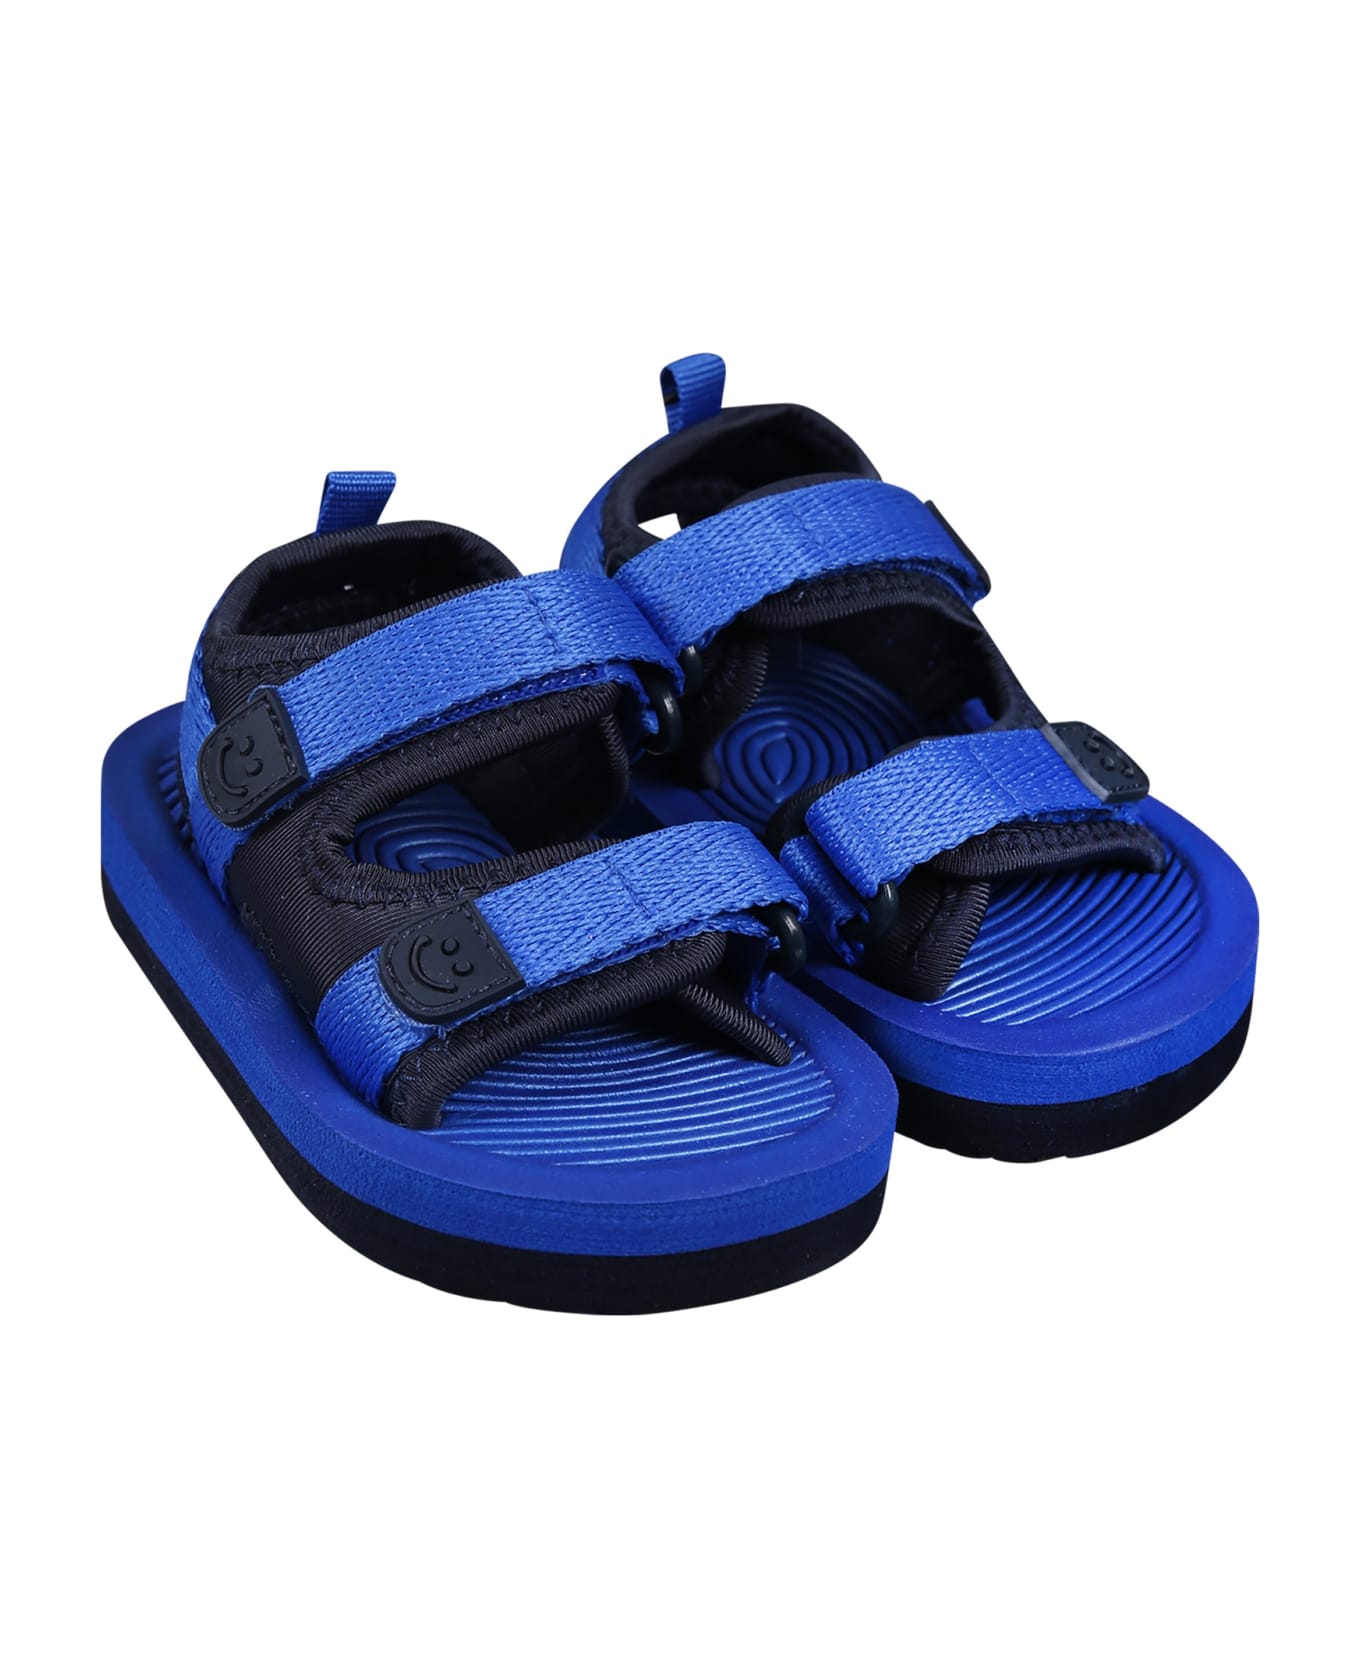 Molo Blue Sandals For Baby Boy With Logo - Blue